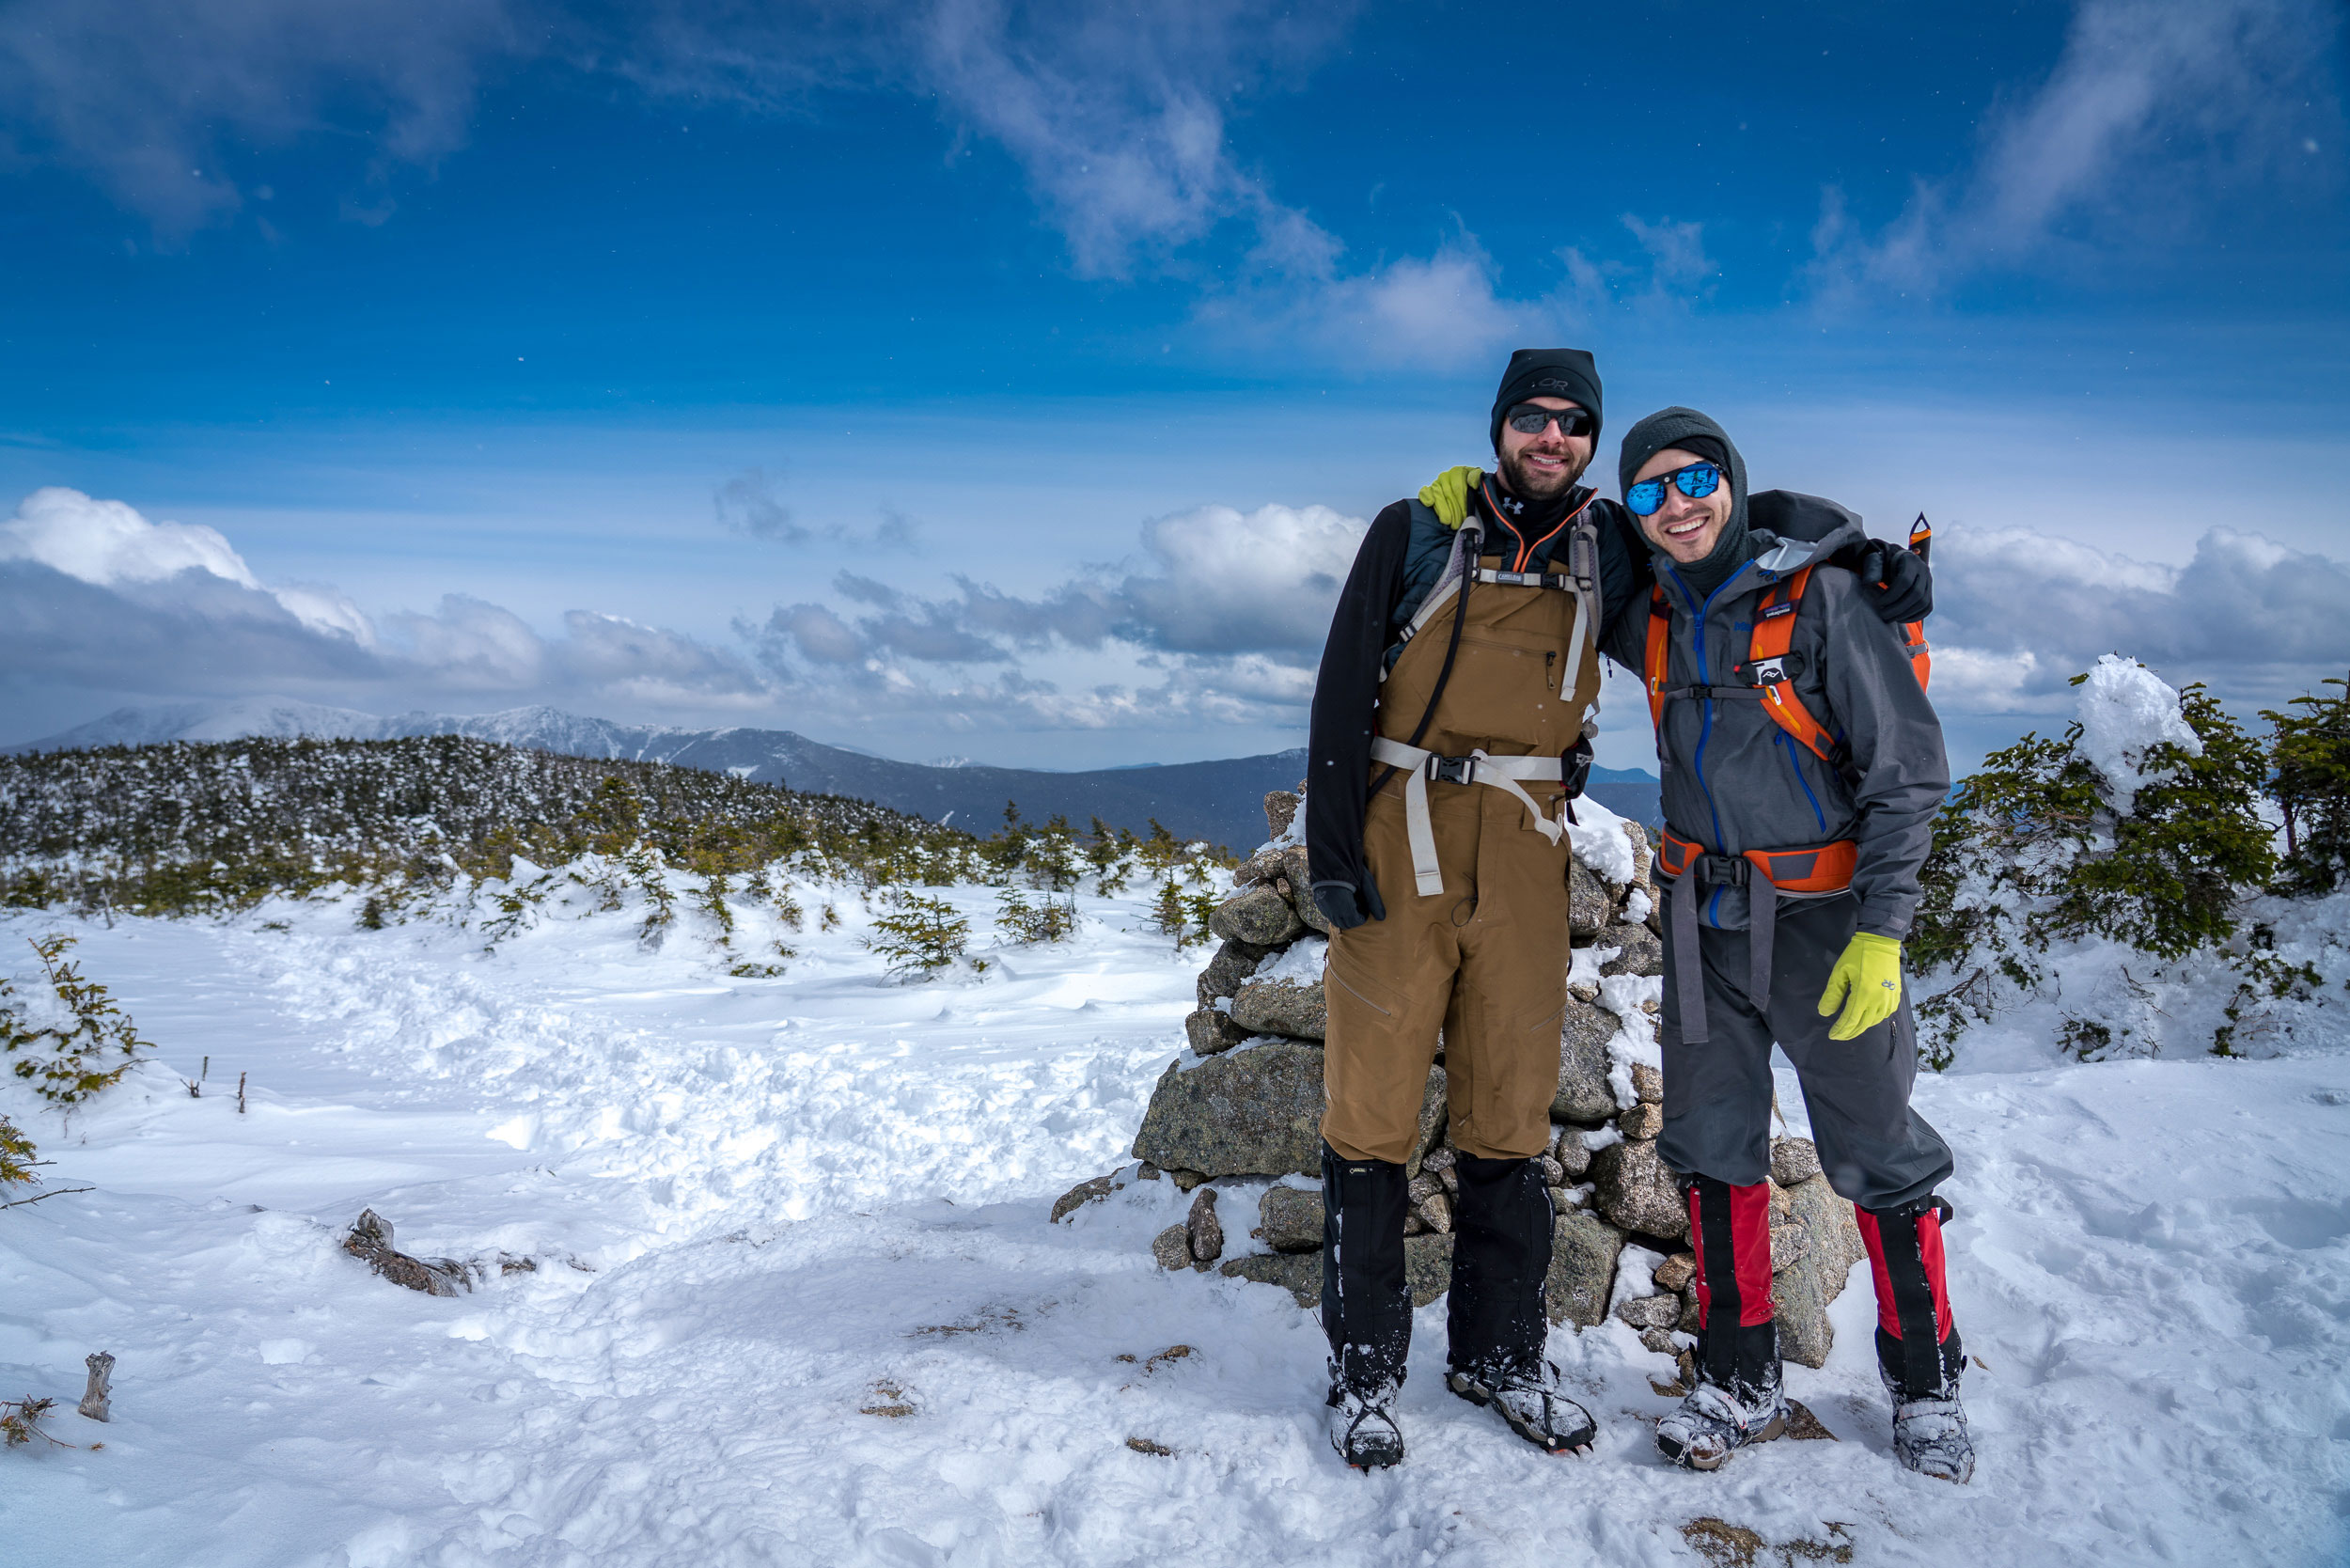 Beginners Guide To Winter Backpacking - The Wandering Queen